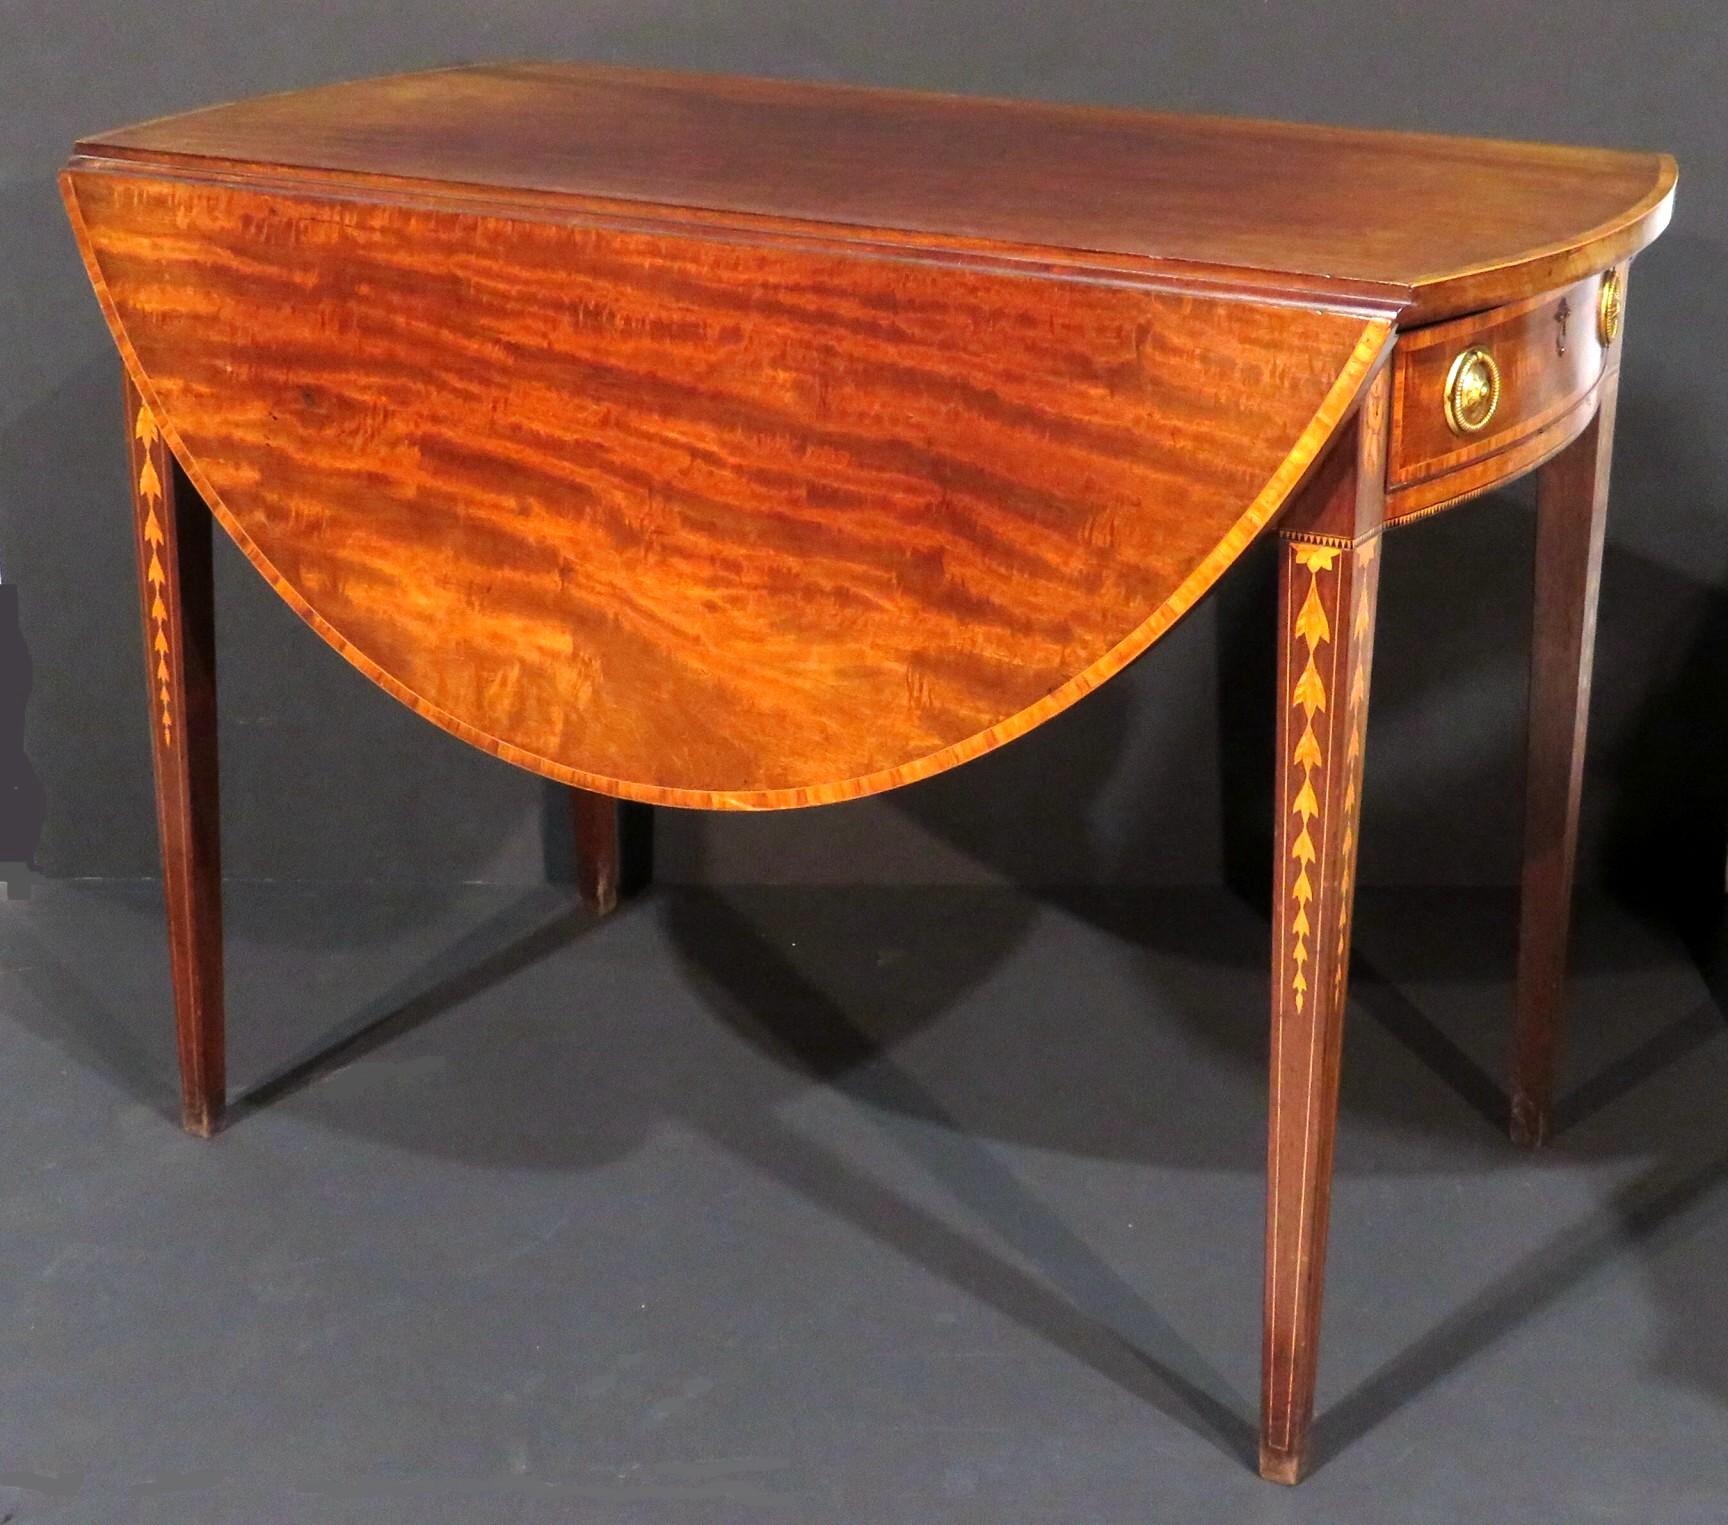 A very fine George III Pembroke table in highly figured mahogany, the solid mahogany top inlaid with a satinwood crossbanded edge sided by two similarly addressed demi-lune drop leaves braced from the underside by twin gateleg supports. The frieze